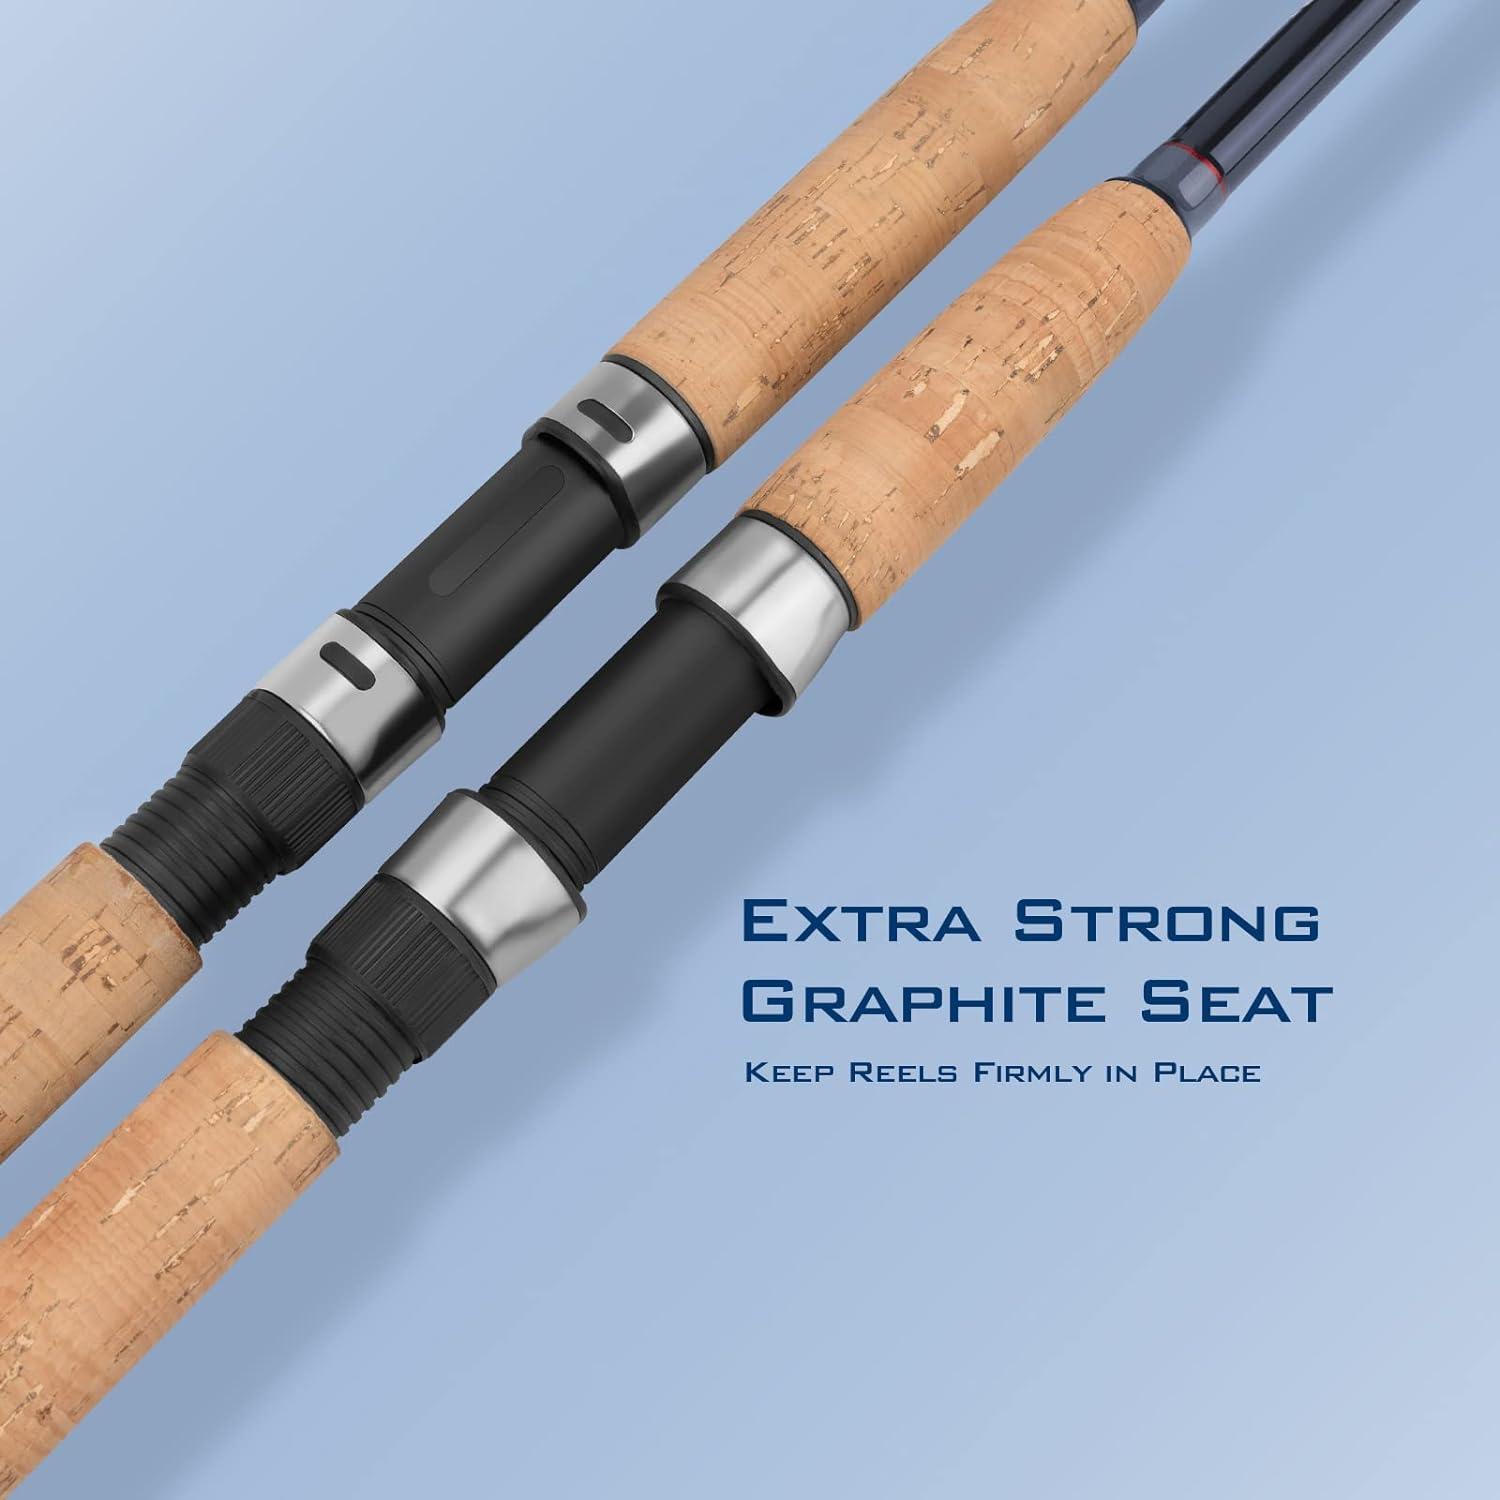 KastKing Progressive Glass Fishing Rods Spinning & Casting Rods Strong 100%  Phenolic Glass Blanks 2Pcs Pack from 5 6 to 10 Stainless Steel Guide  Durable P-Cork Handles A: Spin 7'0/F/M Power